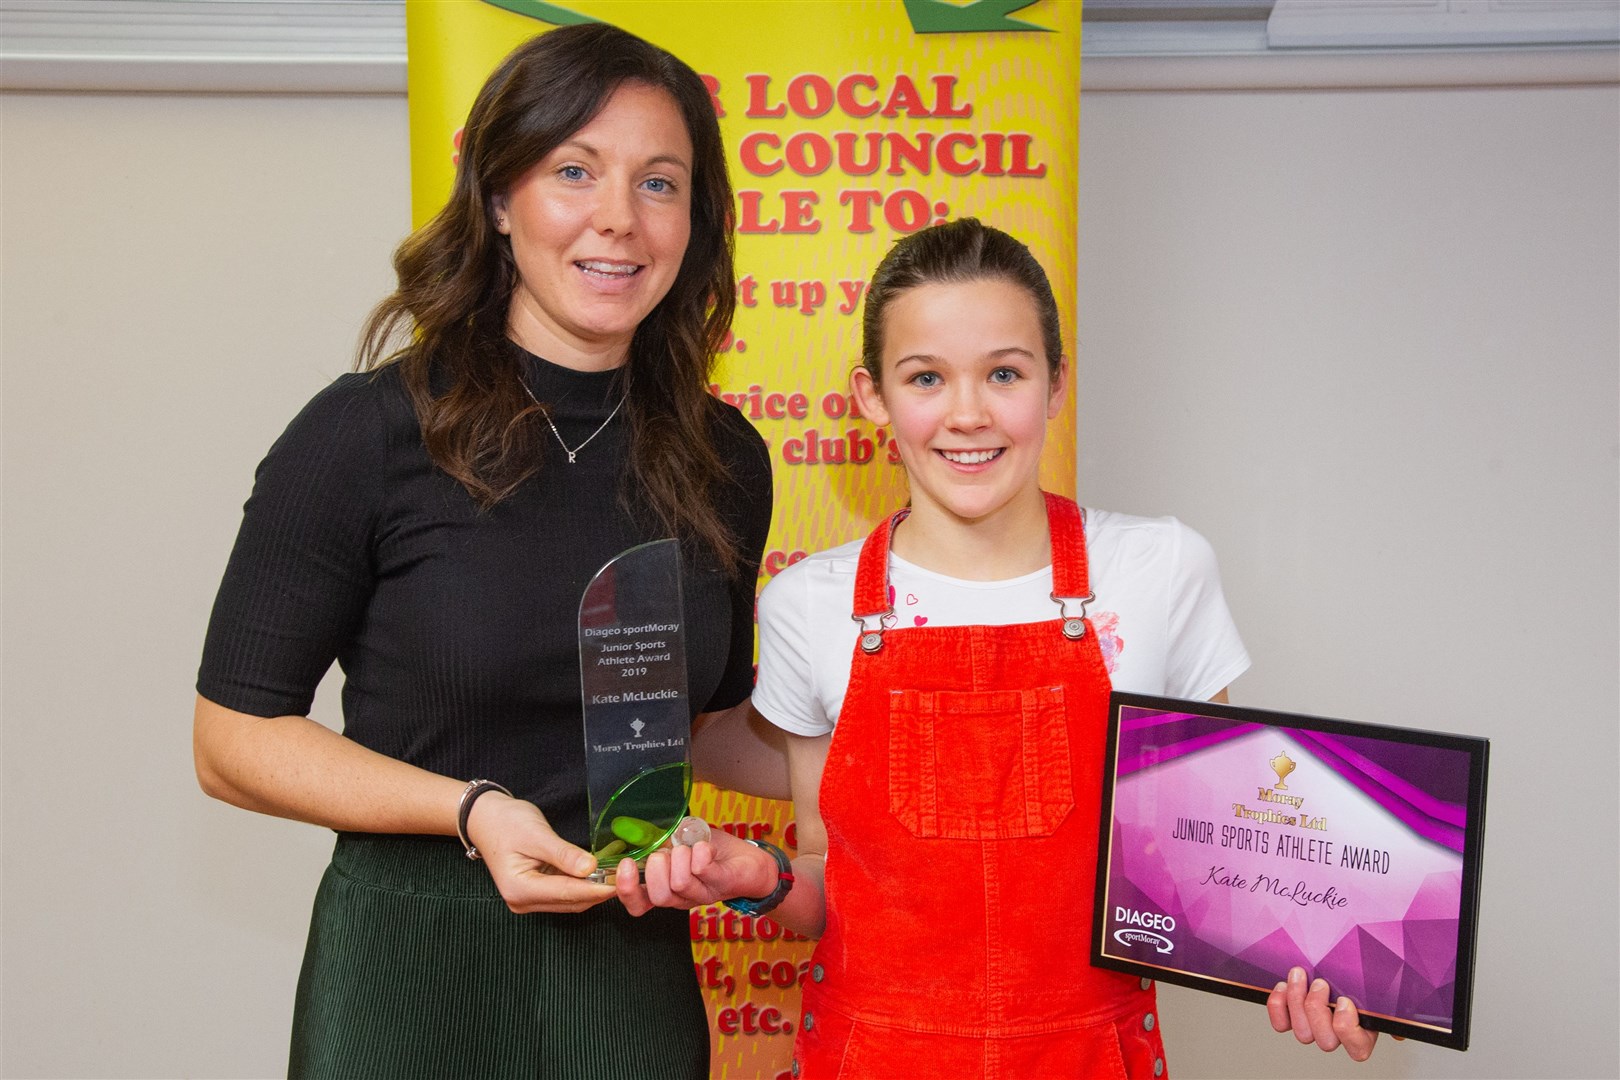 Rachel Corsie presented orienteer Kate McLuckie, from Elgin, with her award for Junior Sports Athlete of the Year. Picture: Daniel Forsyth